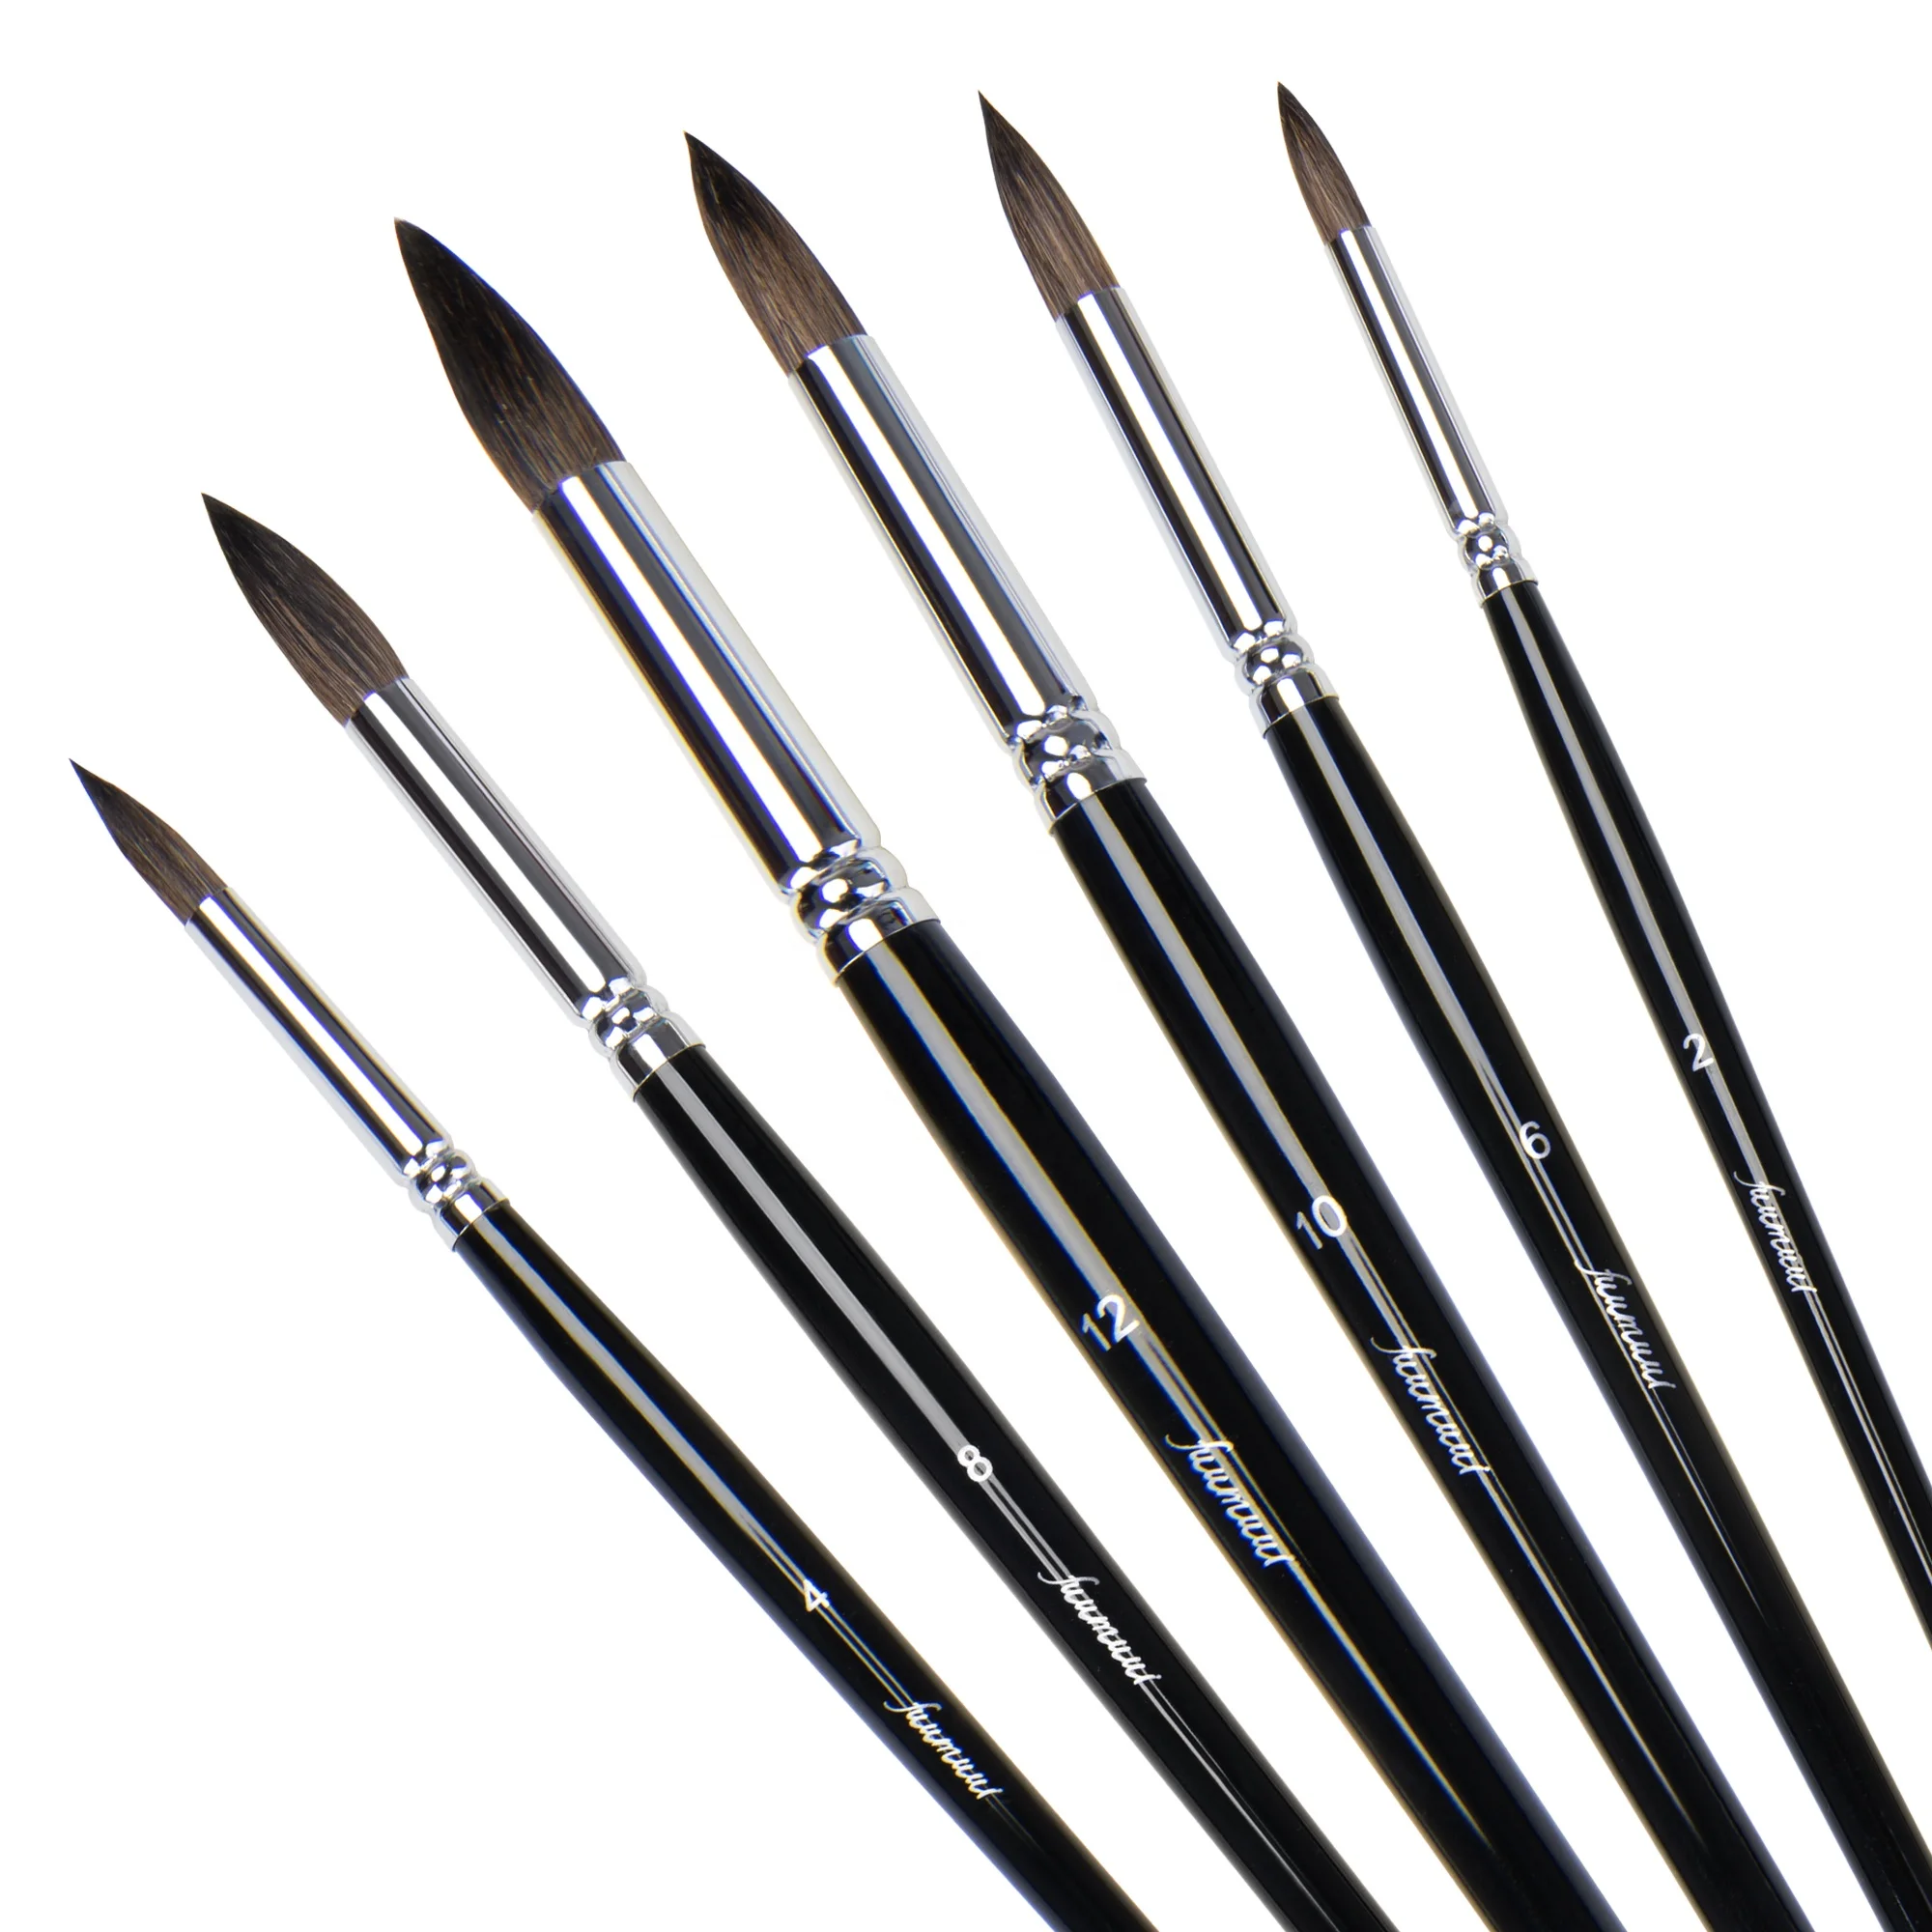 
6 Pieces Round Shape OEM Hair Artist Brush for All Water Based Art Watercolor Brush New squirrel hair painting brush 